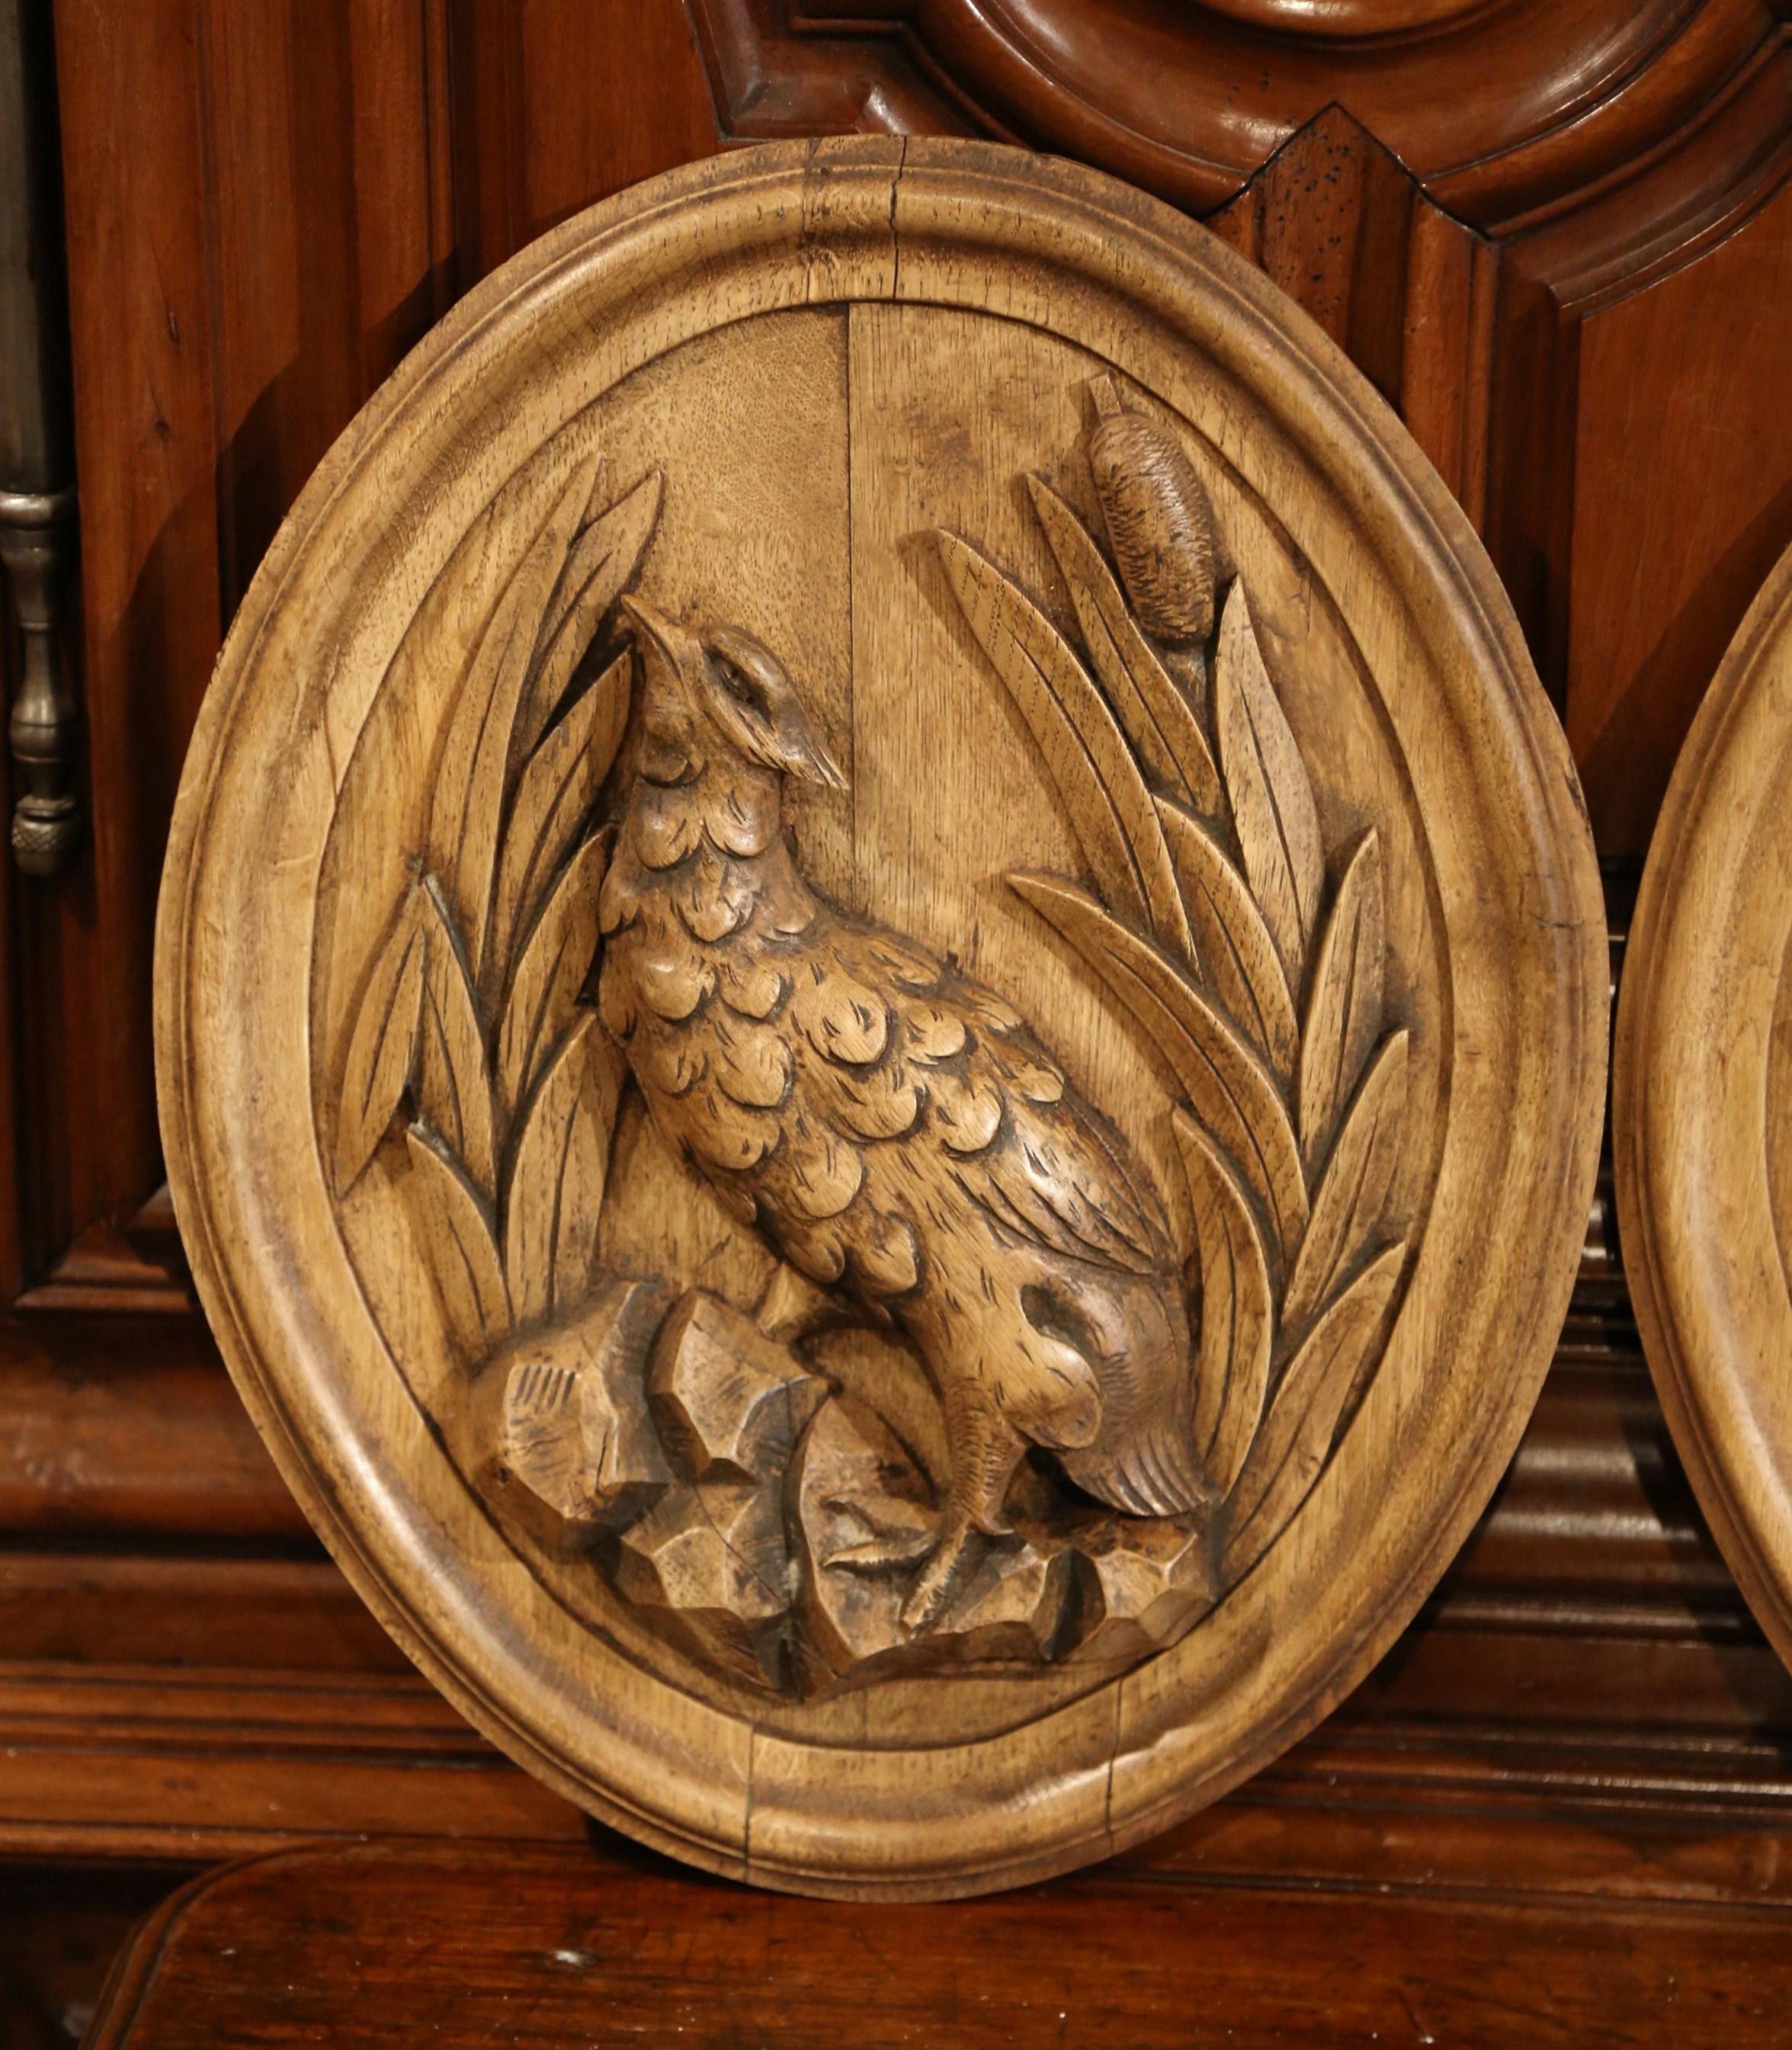 This pair of antique Black Forest bird sculptures was crafted in France, circa 1870. Made out of oak, each oval wooden plaque features a hand carved partridge in high relief standing on rocks with tall reeds around. Both pieces have been stripped